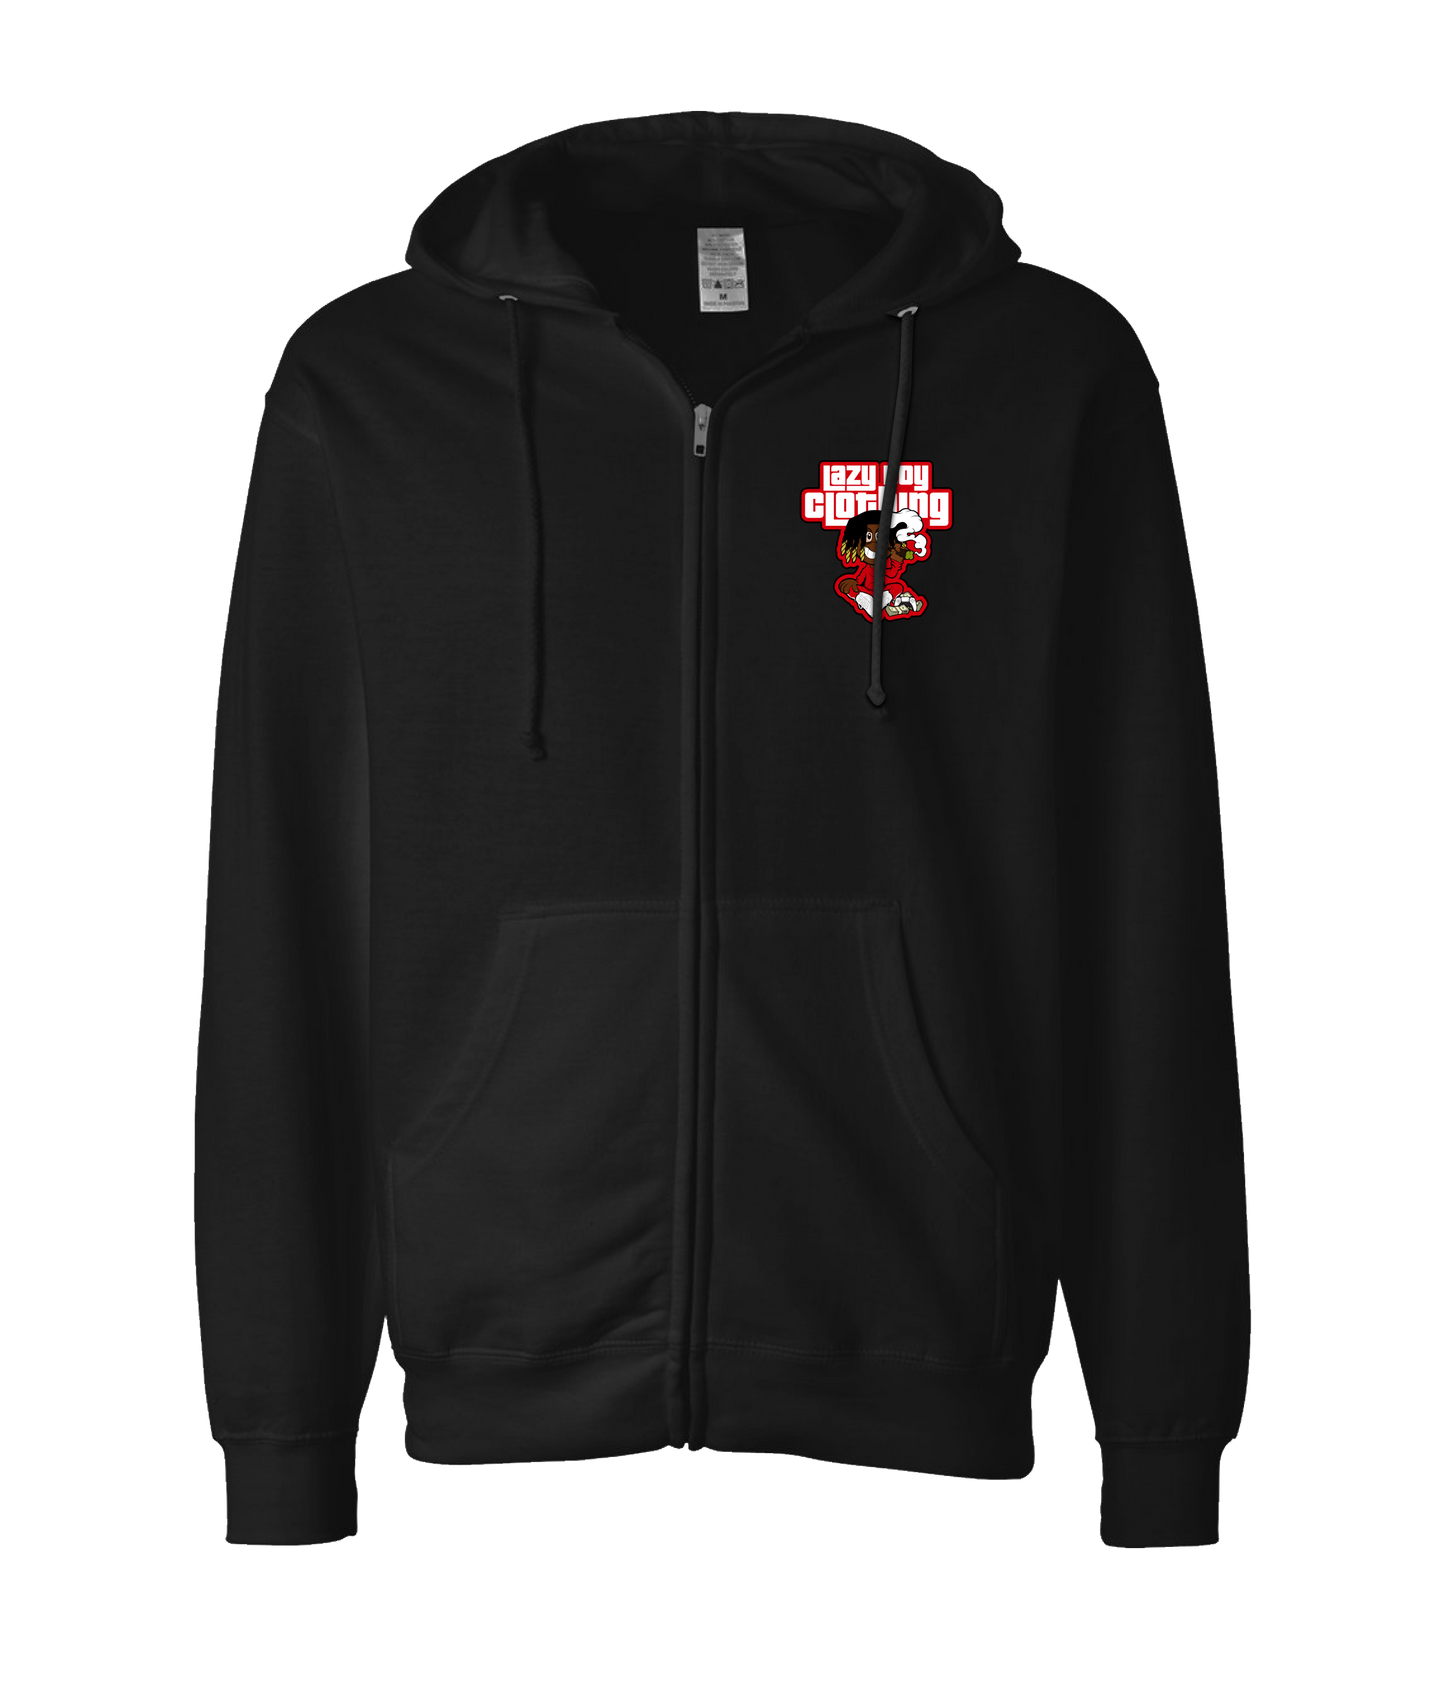 Ybspitbars - Lazy Boy Clothing Red - Black Zip Up Hoodie